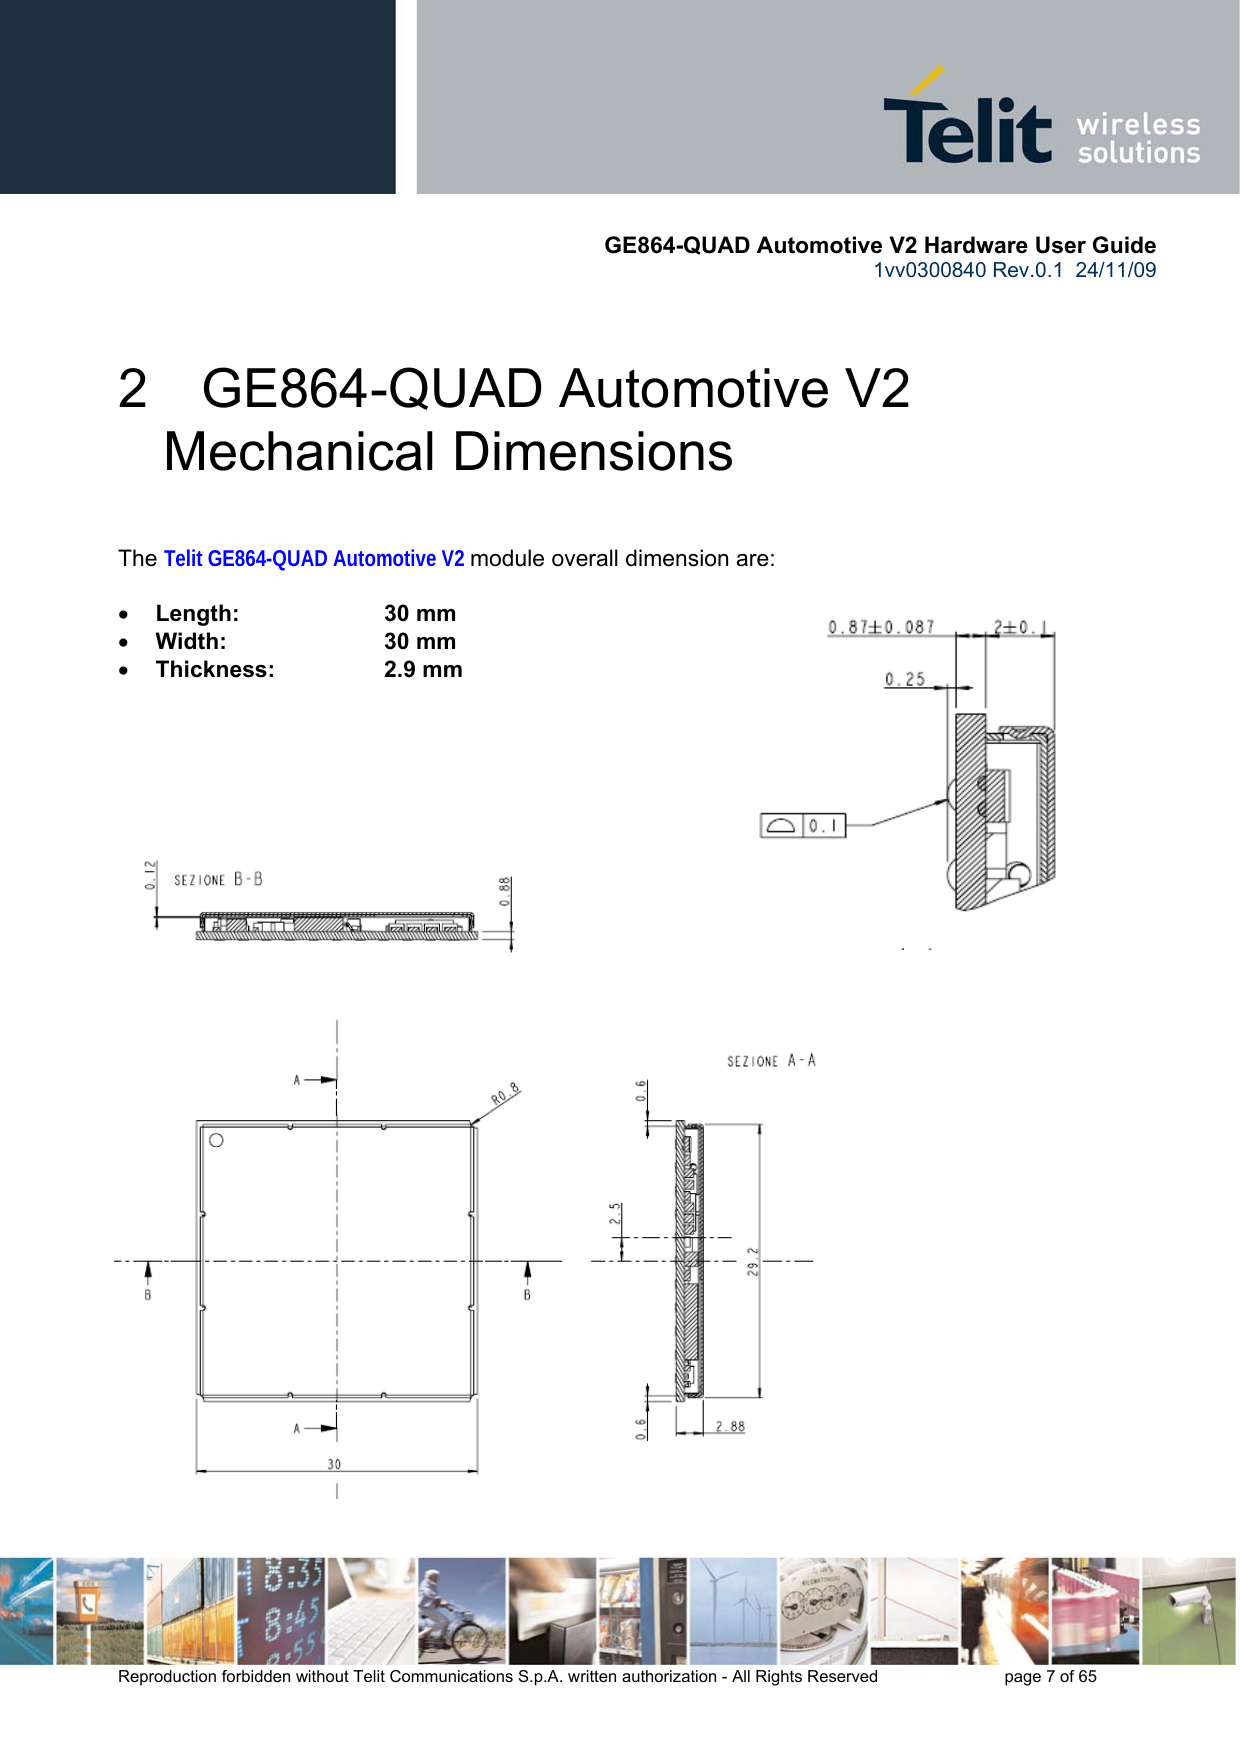       GE864-QUAD Automotive V2 Hardware User Guide 1vv0300840 Rev.0.1  24/11/09      Reproduction forbidden without Telit Communications S.p.A. written authorization - All Rights Reserved    page 7 of 65  2  GE864-QUAD Automotive V2 Mechanical Dimensions  The Telit GE864-QUAD Automotive V2 module overall dimension are:  • Length:     30 mm • Width:     30 mm  • Thickness:     2.9 mm      